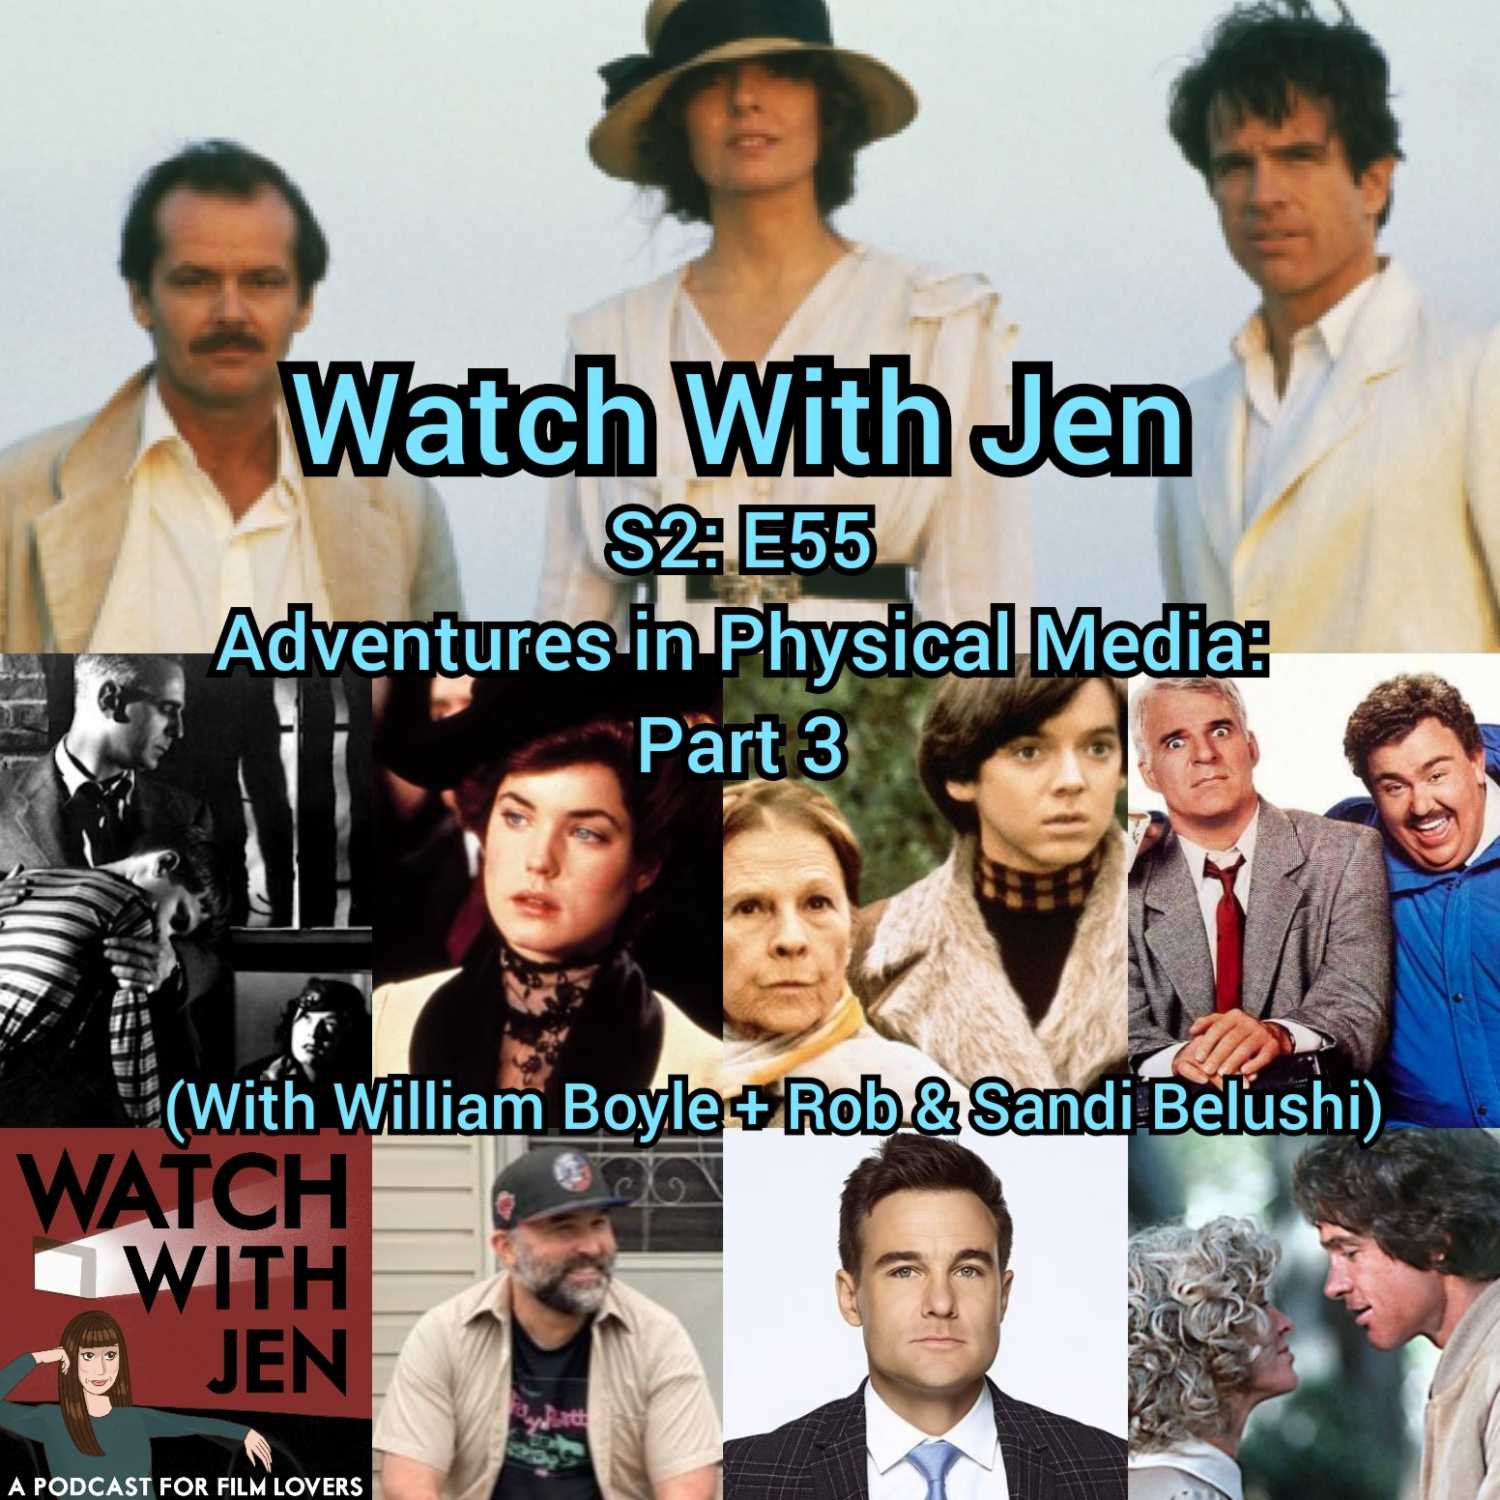 Watch With Jen - S2: E55 - Adventures in Physical Media: Part 3 (With William Boyle + Rob & Sandi Belushi)